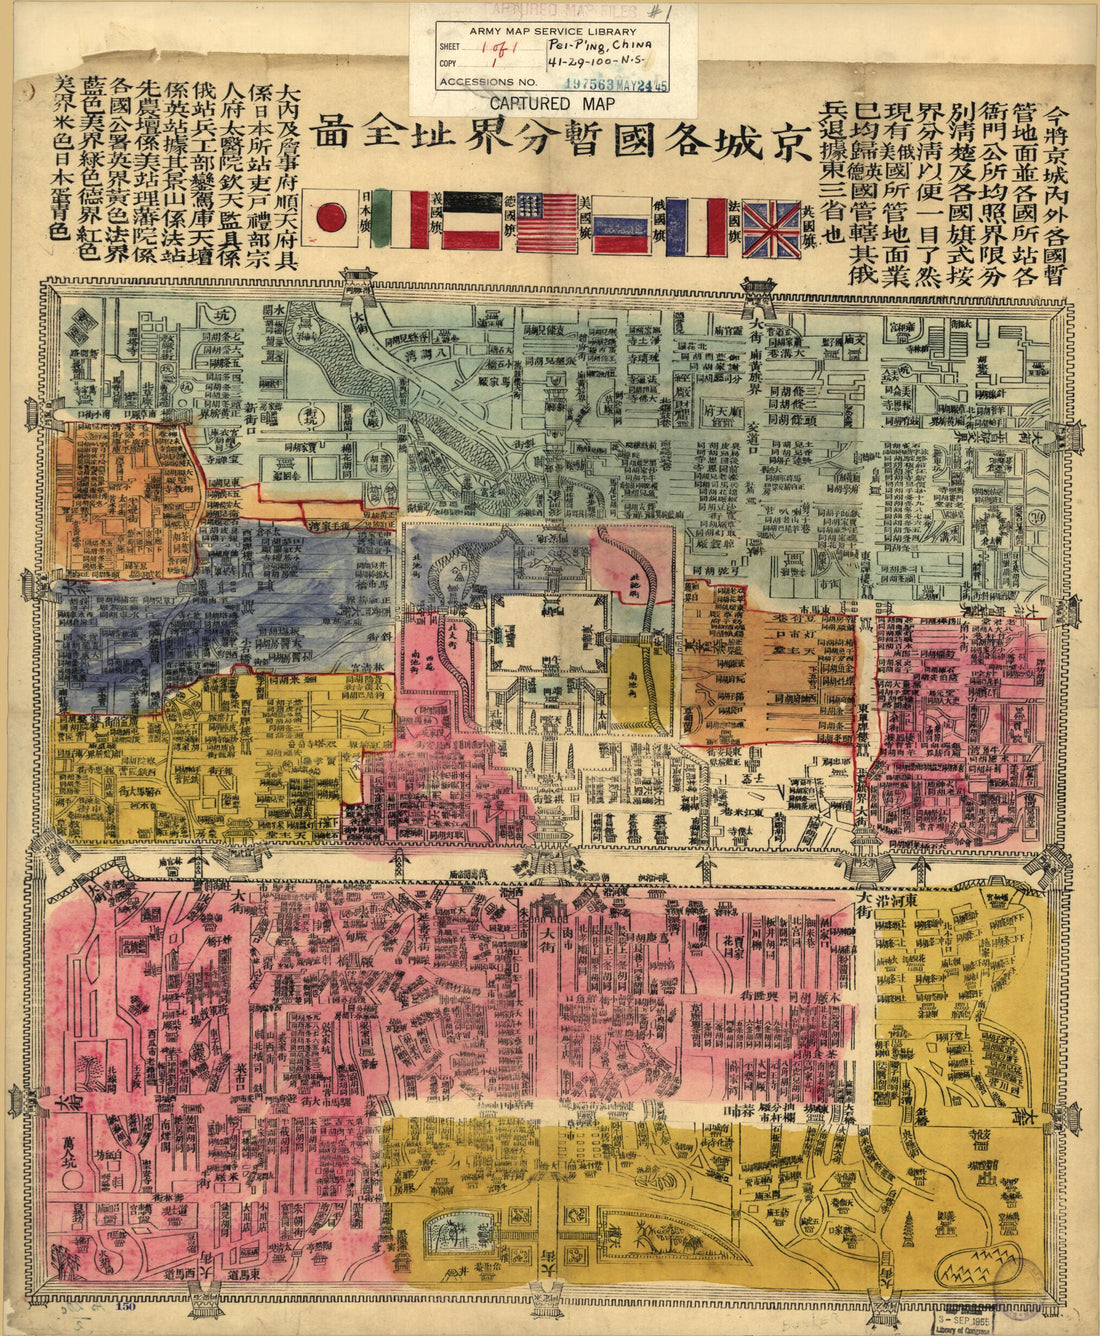 This old map of Jing Cheng Ge Guo Zan Fen Jie Zhi Quan Tu from 1900 was created by  in 1900